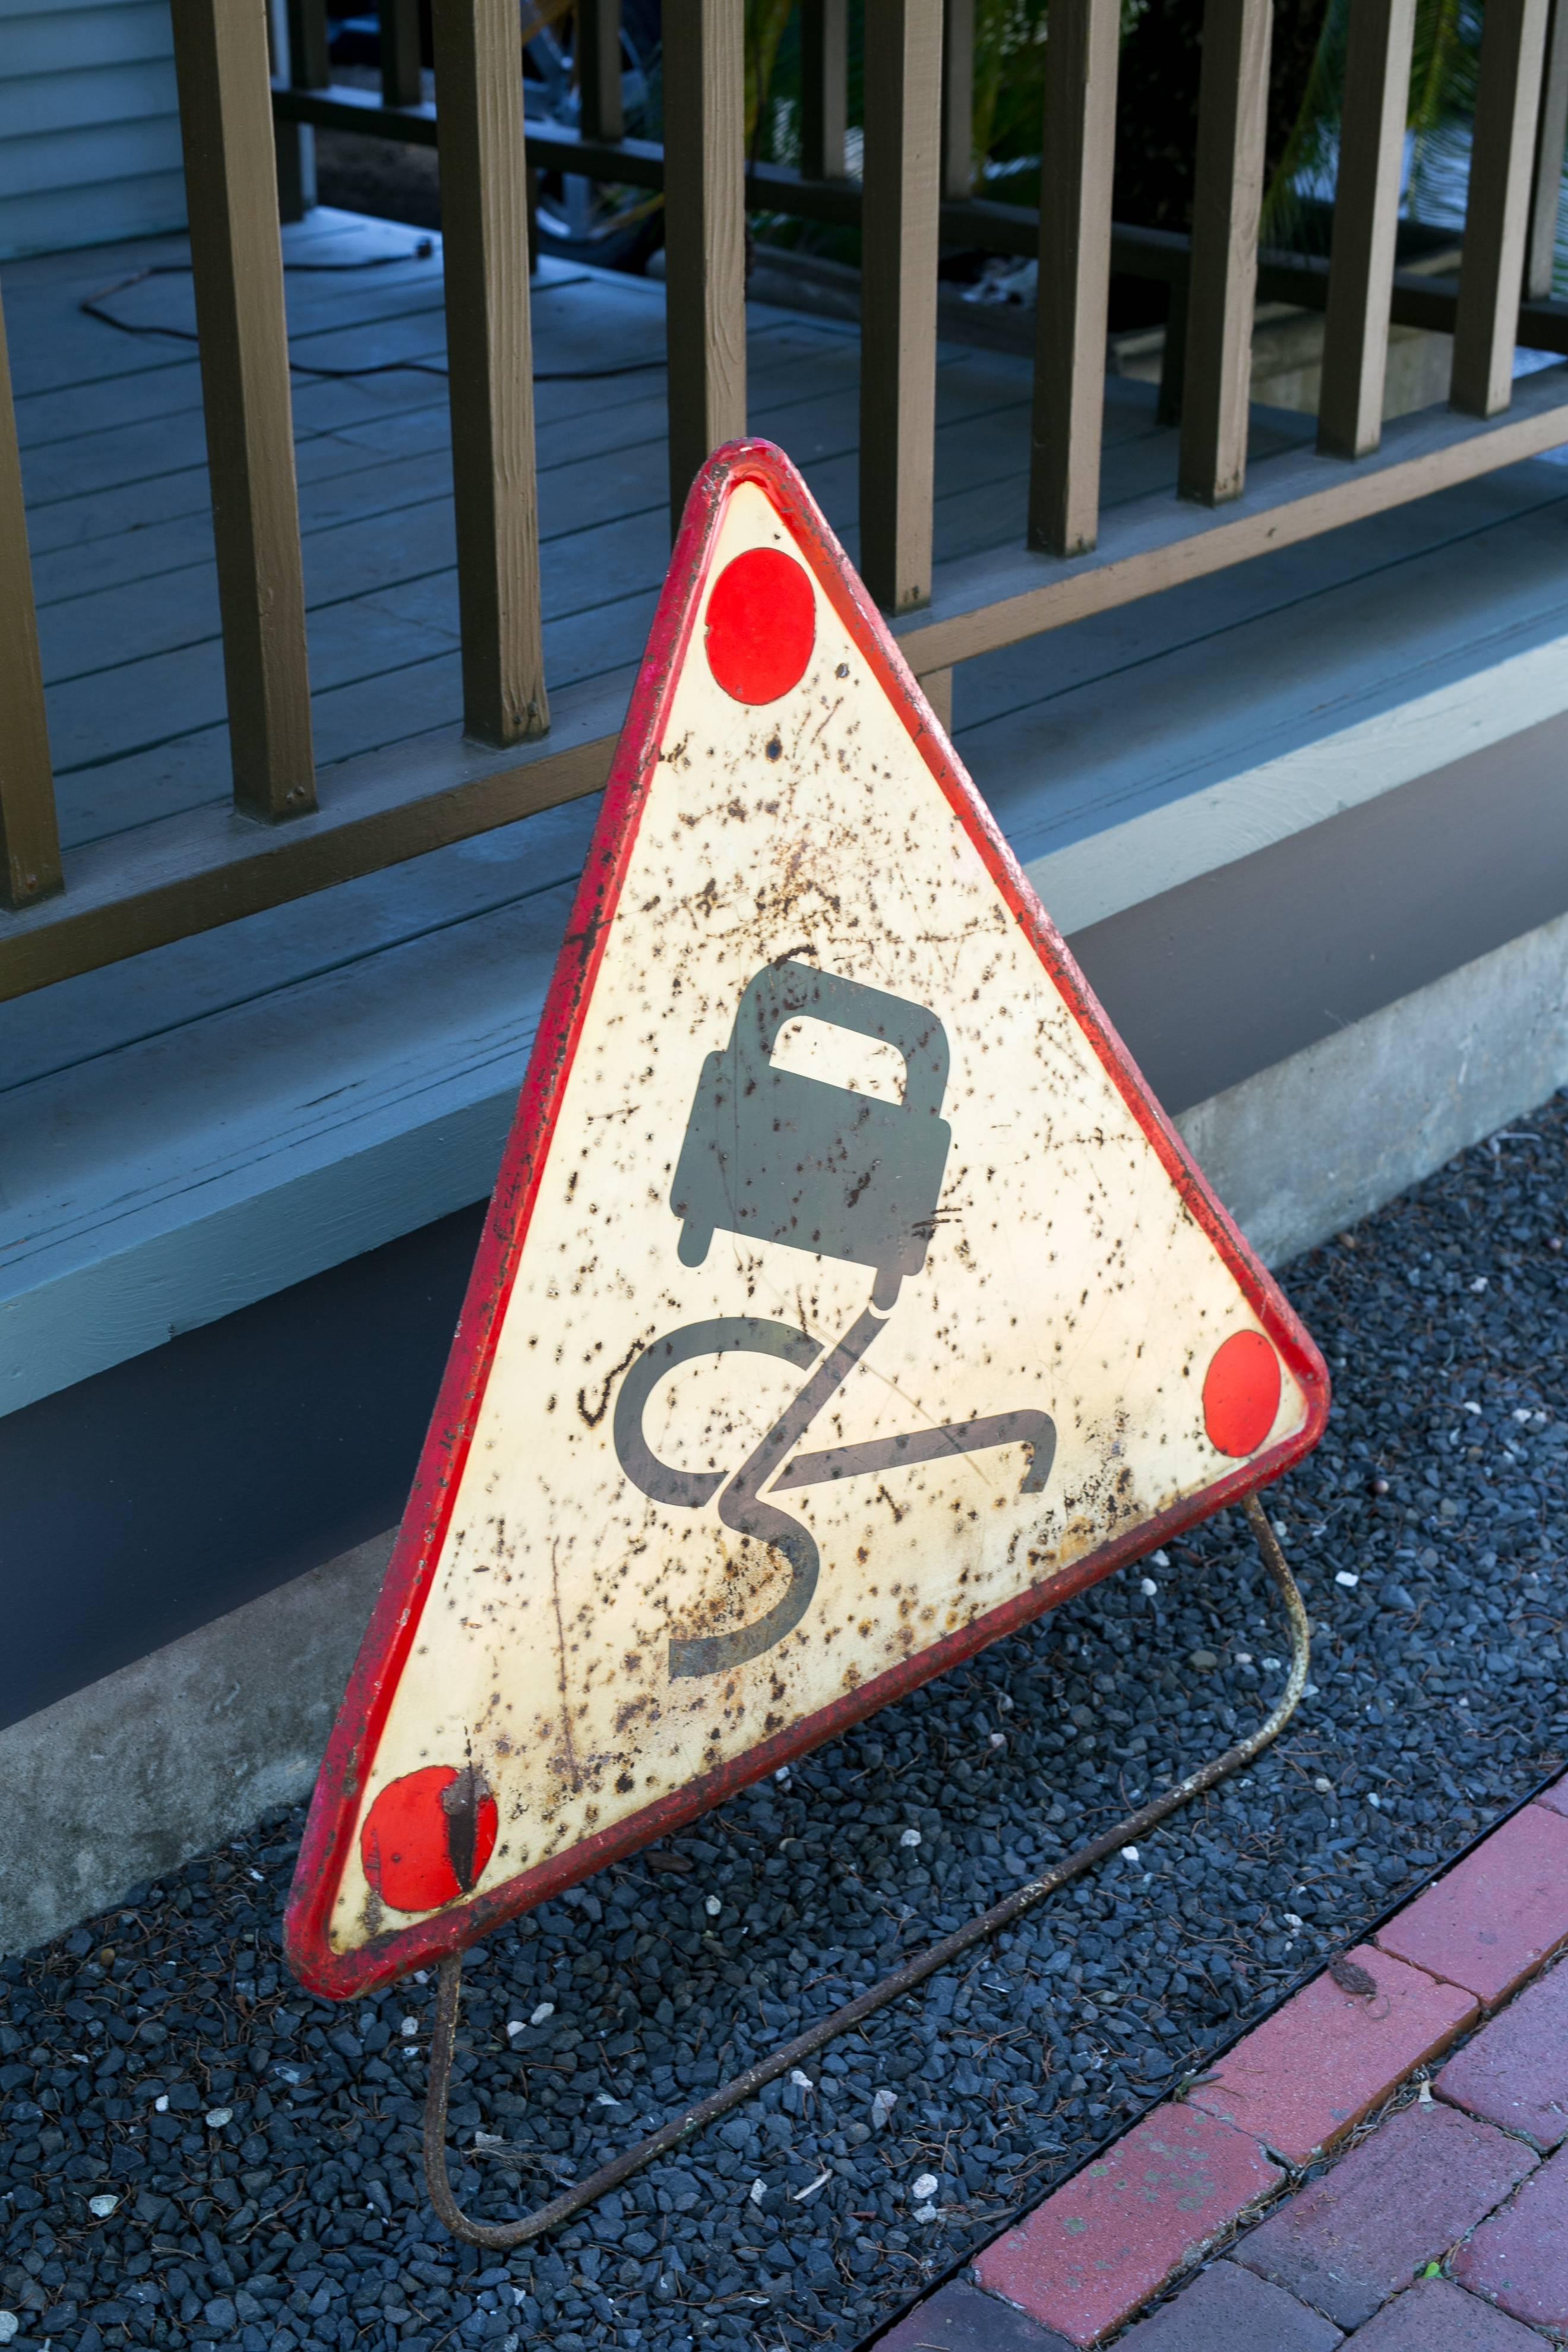 Hand-painted red, black and white triangular metal road safety sign from France, circa 1920s-1930s. Comes with iron stand attached, as it would have been used on the street to warn motorists. Wonderful colors and graphics. Quite large in scale.